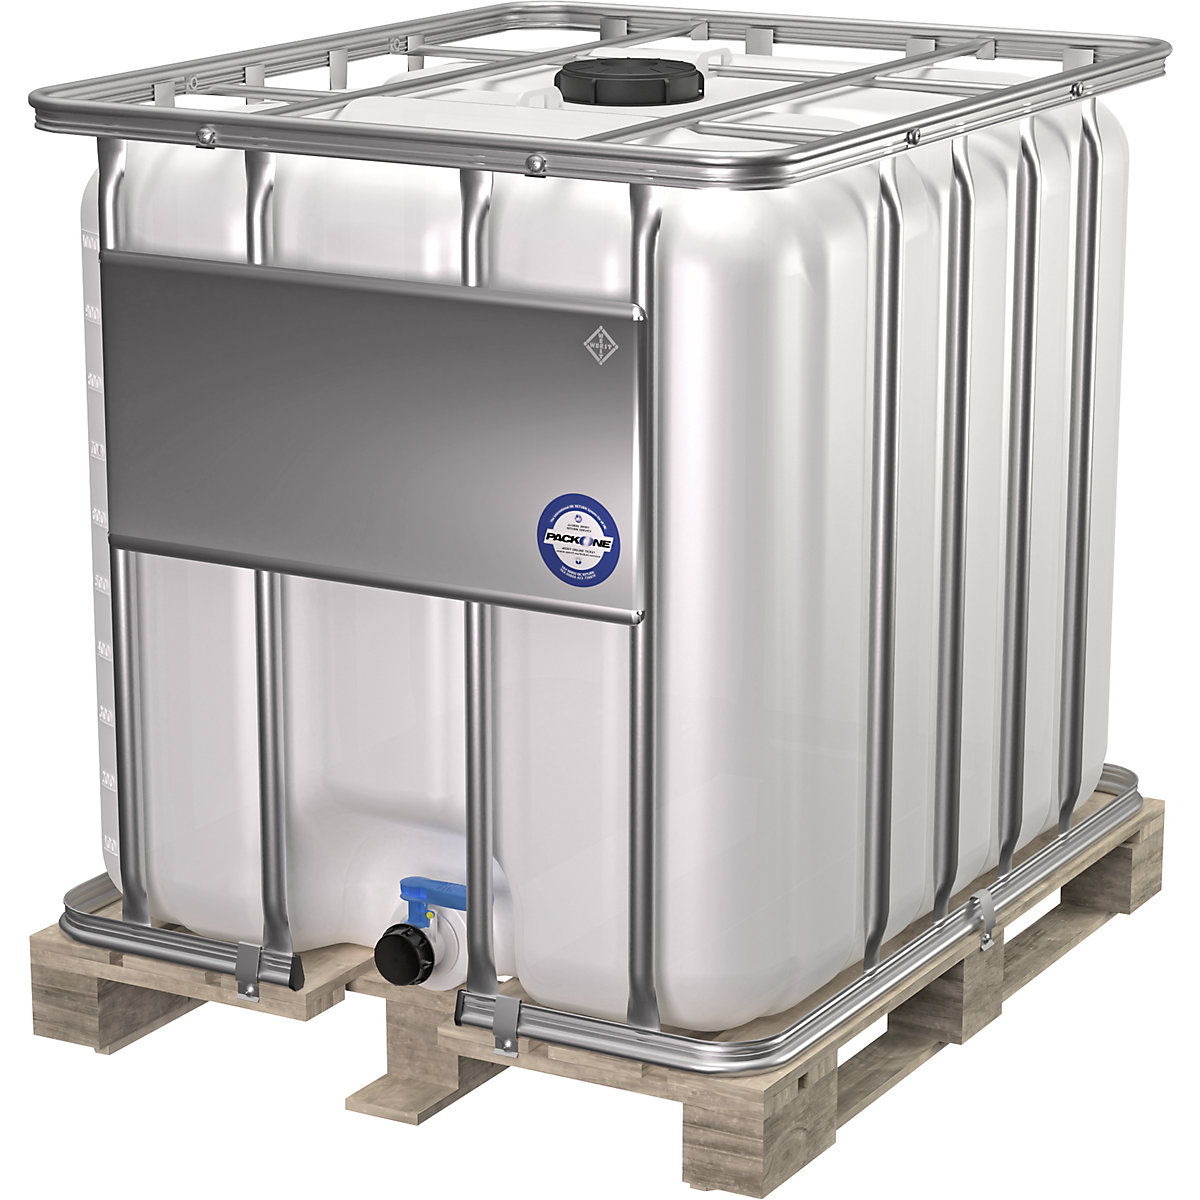 Container IBC, standard